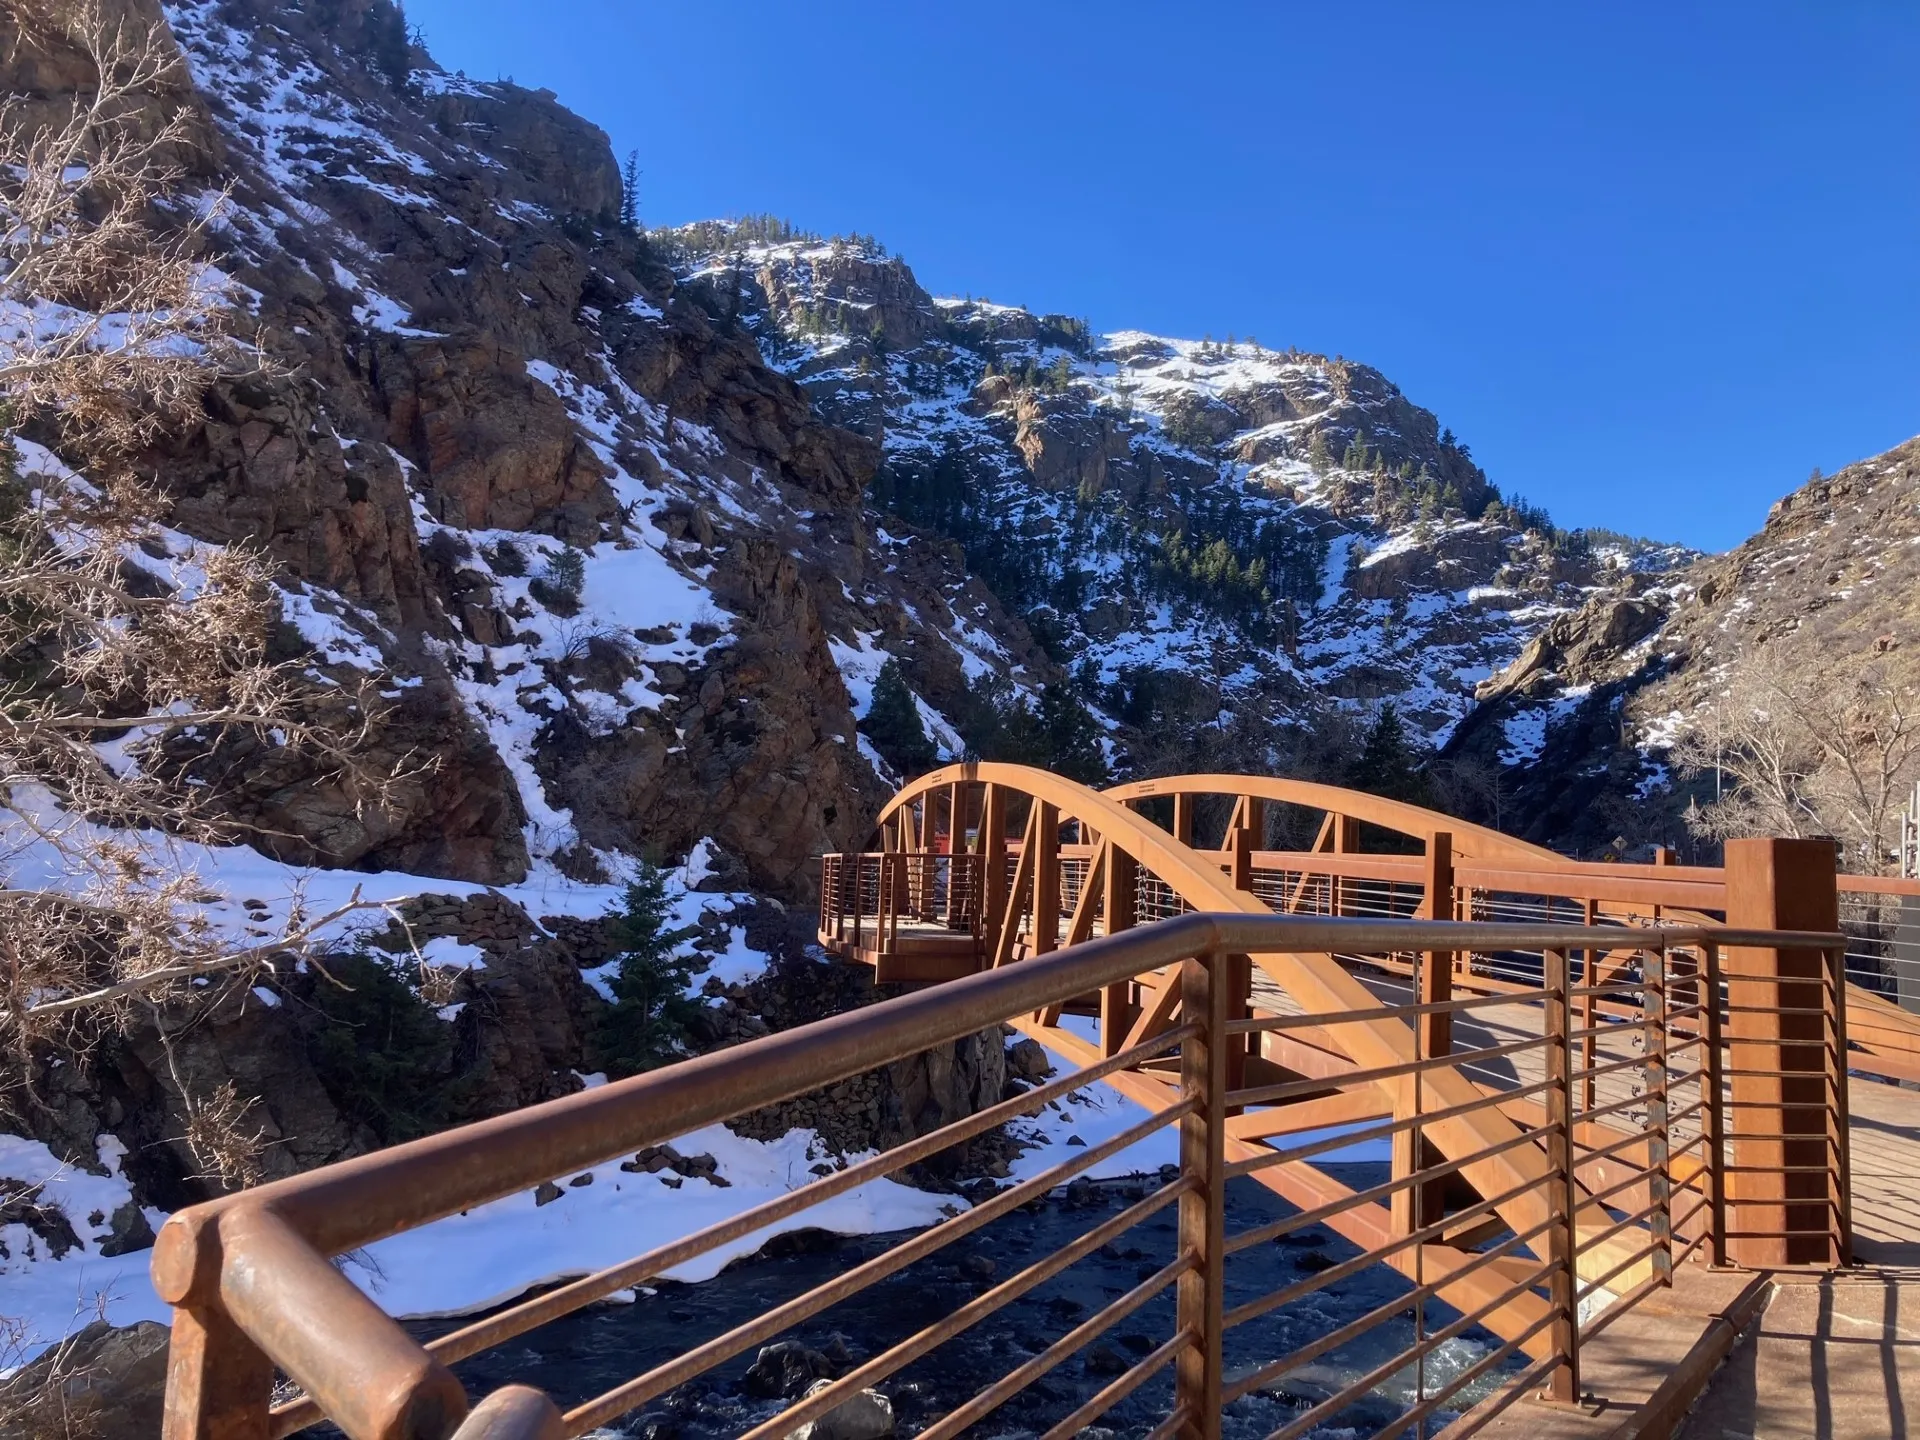 Brilliant blue sky over a canyon with snow clinging to the walls.  Brown footbridge goes over Clear Creek.